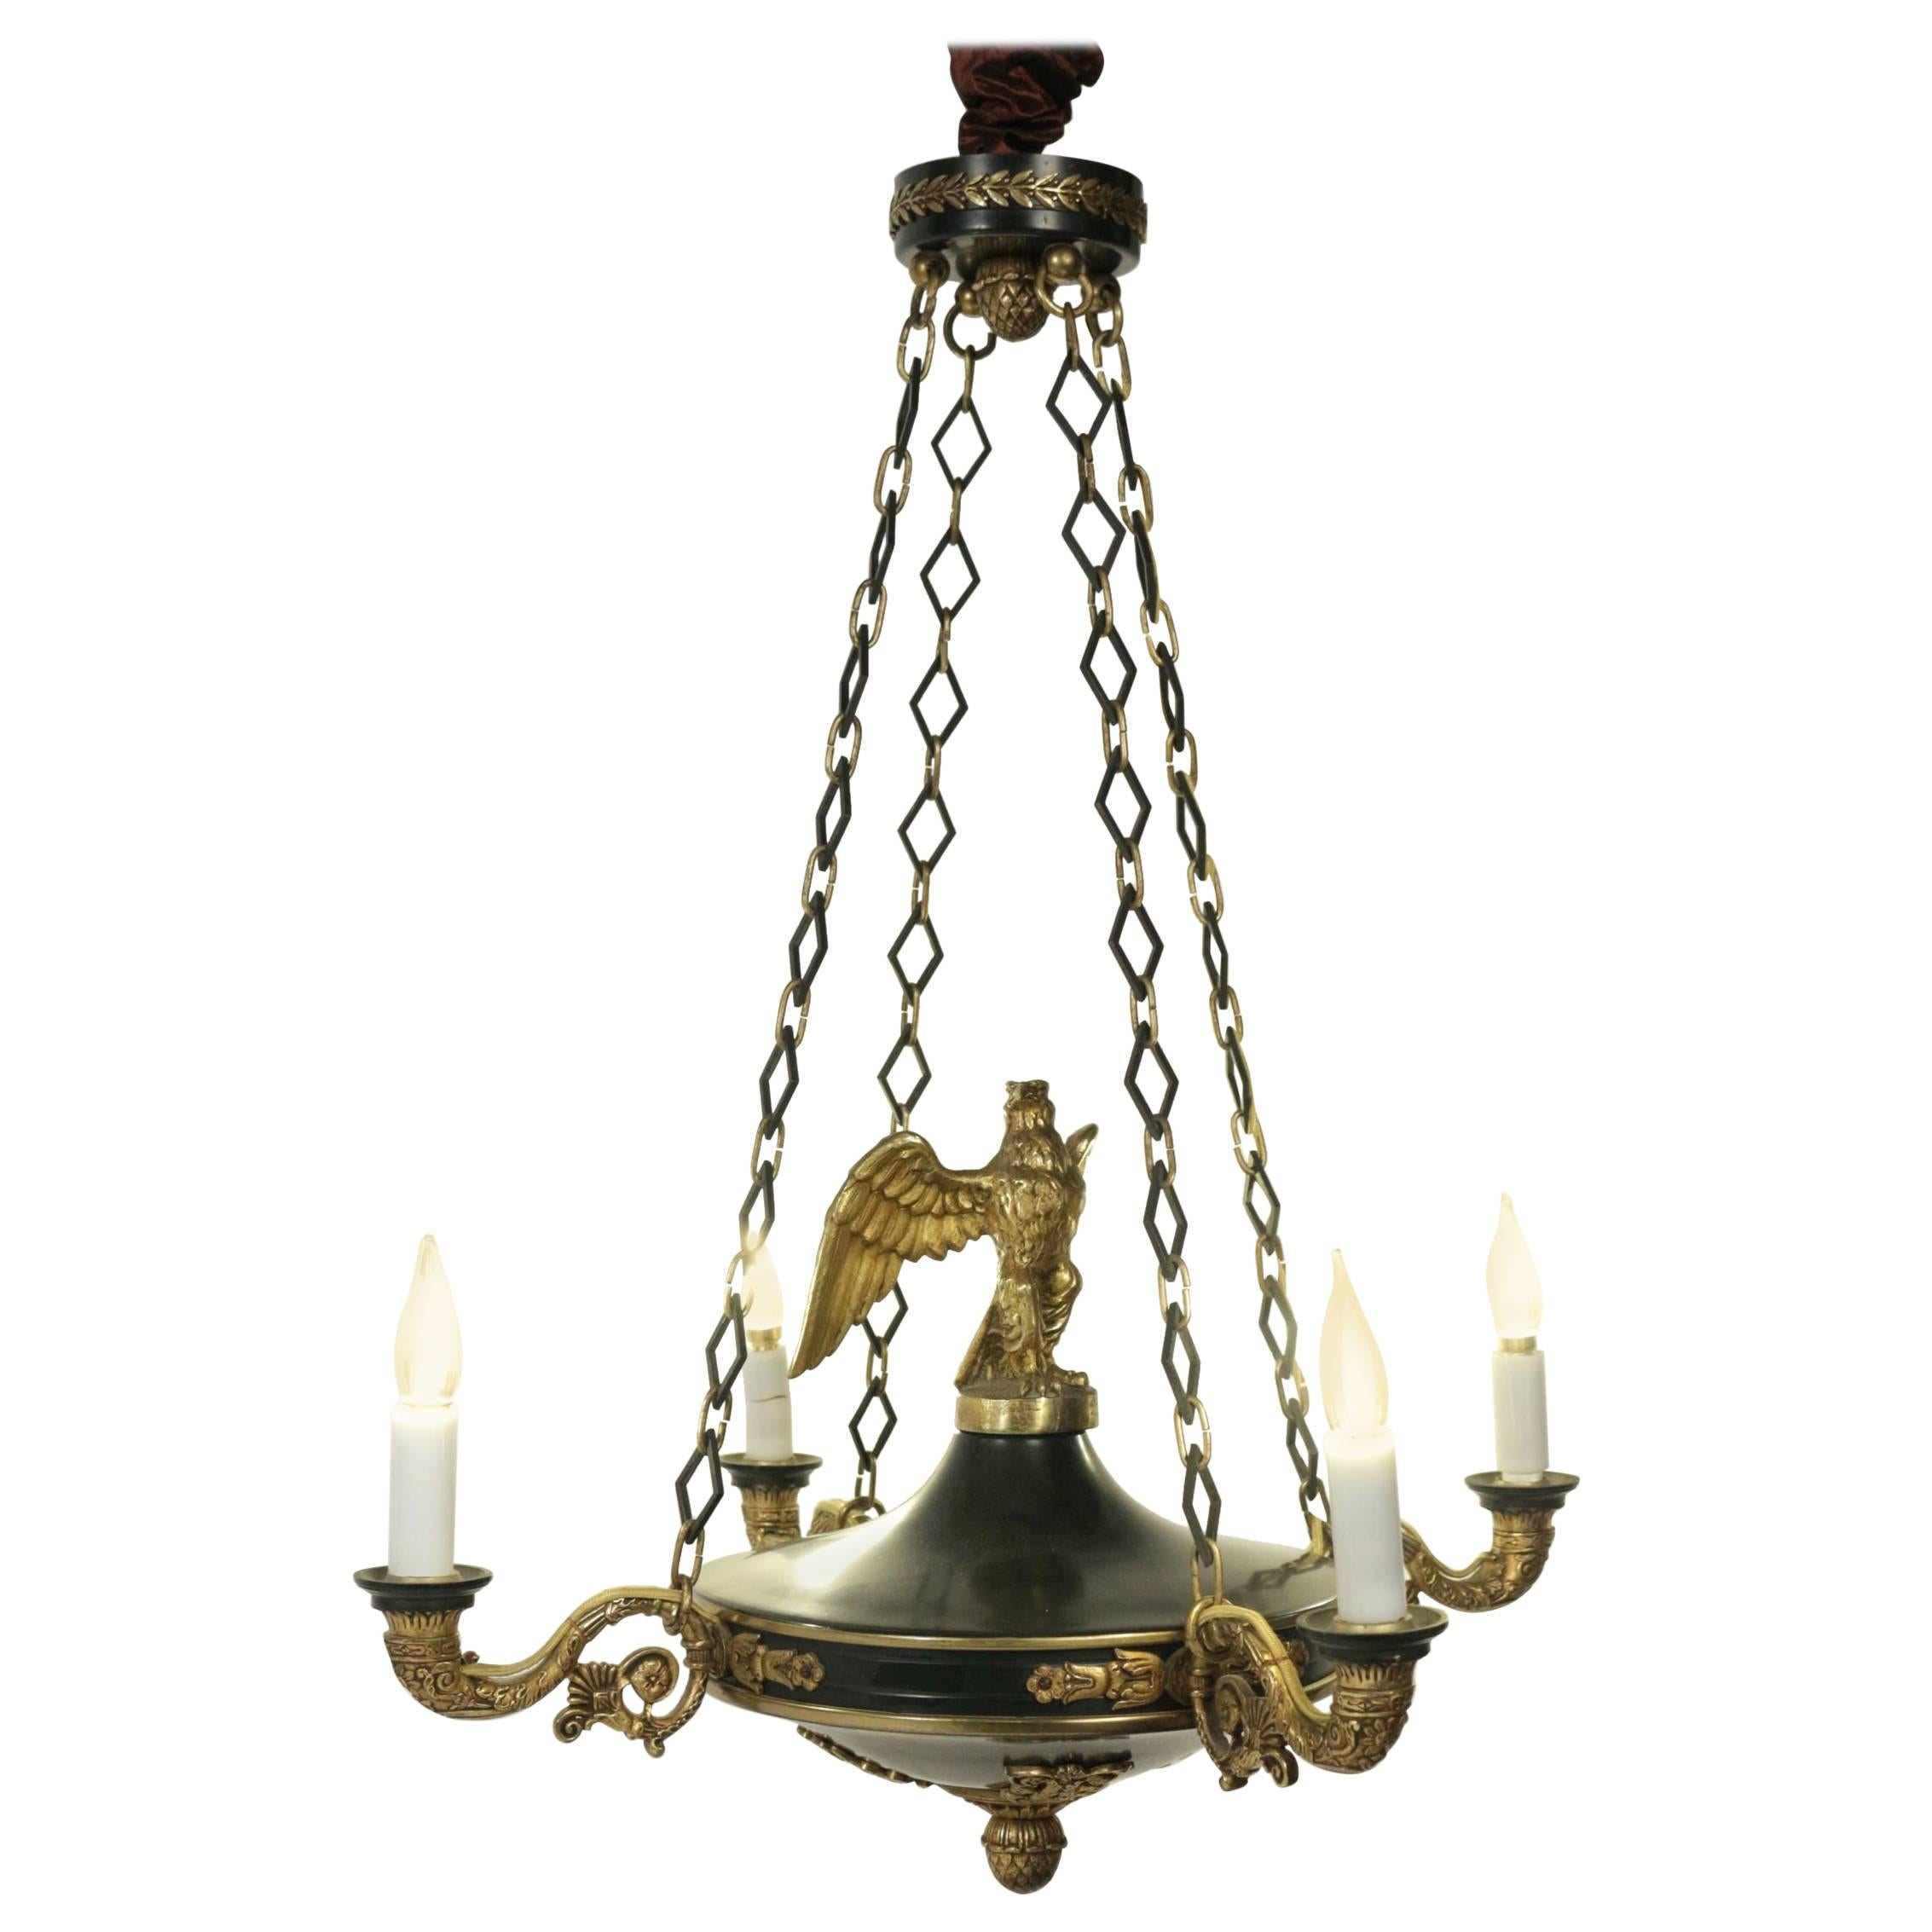 Chandelier Empire Style with an Eagle in Gold Gilt Bronze, 19th Century